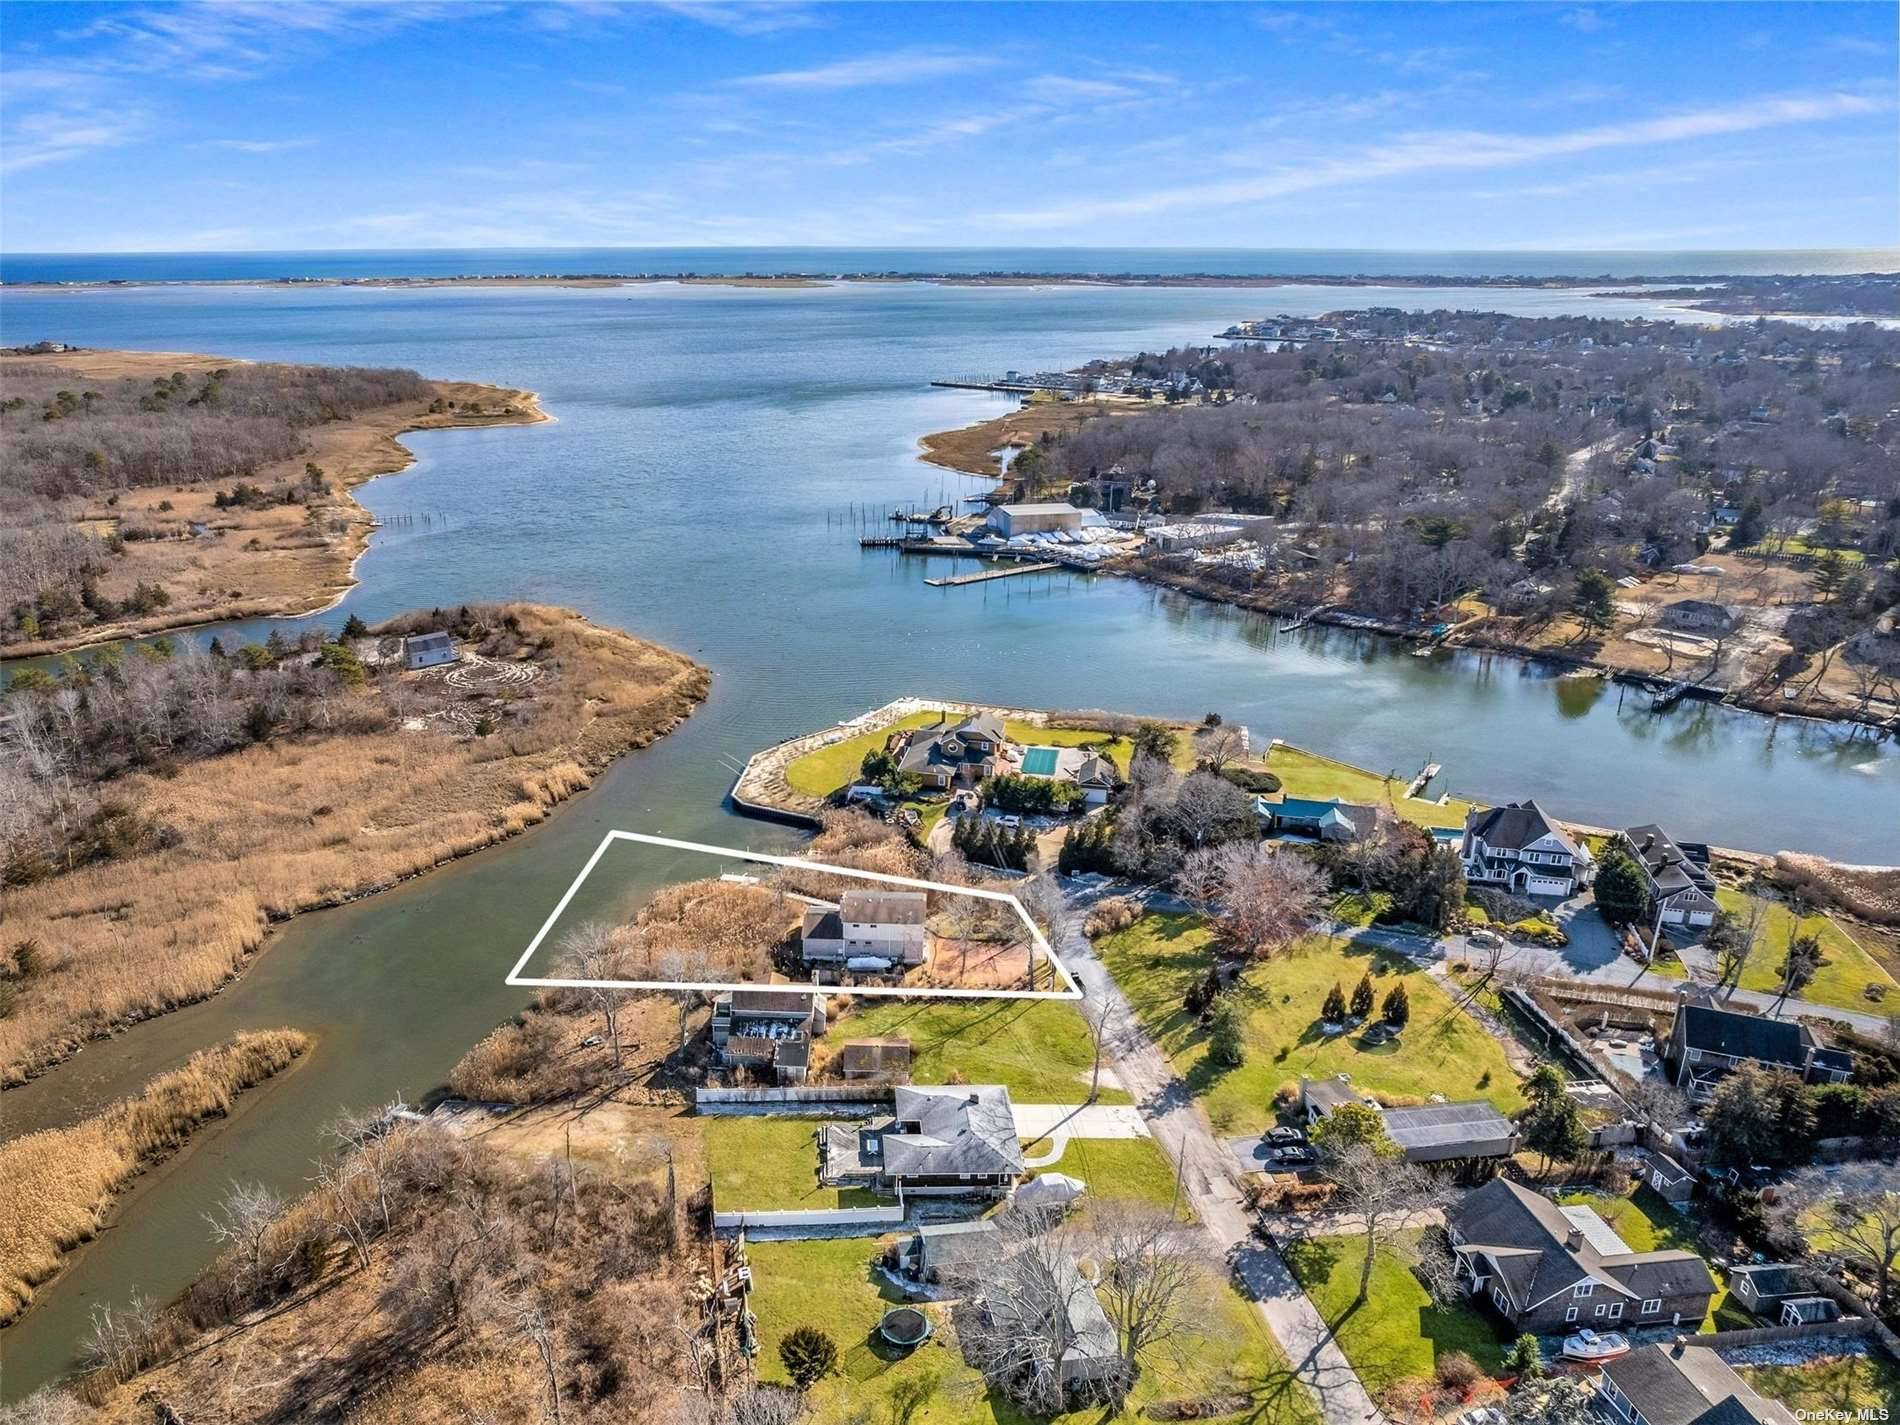 Located on Weesuck Creek and overlooking Shinnecock Bay, 13 Bayberry Lane in East Quogue is a private hidden gem close to the heart of town.